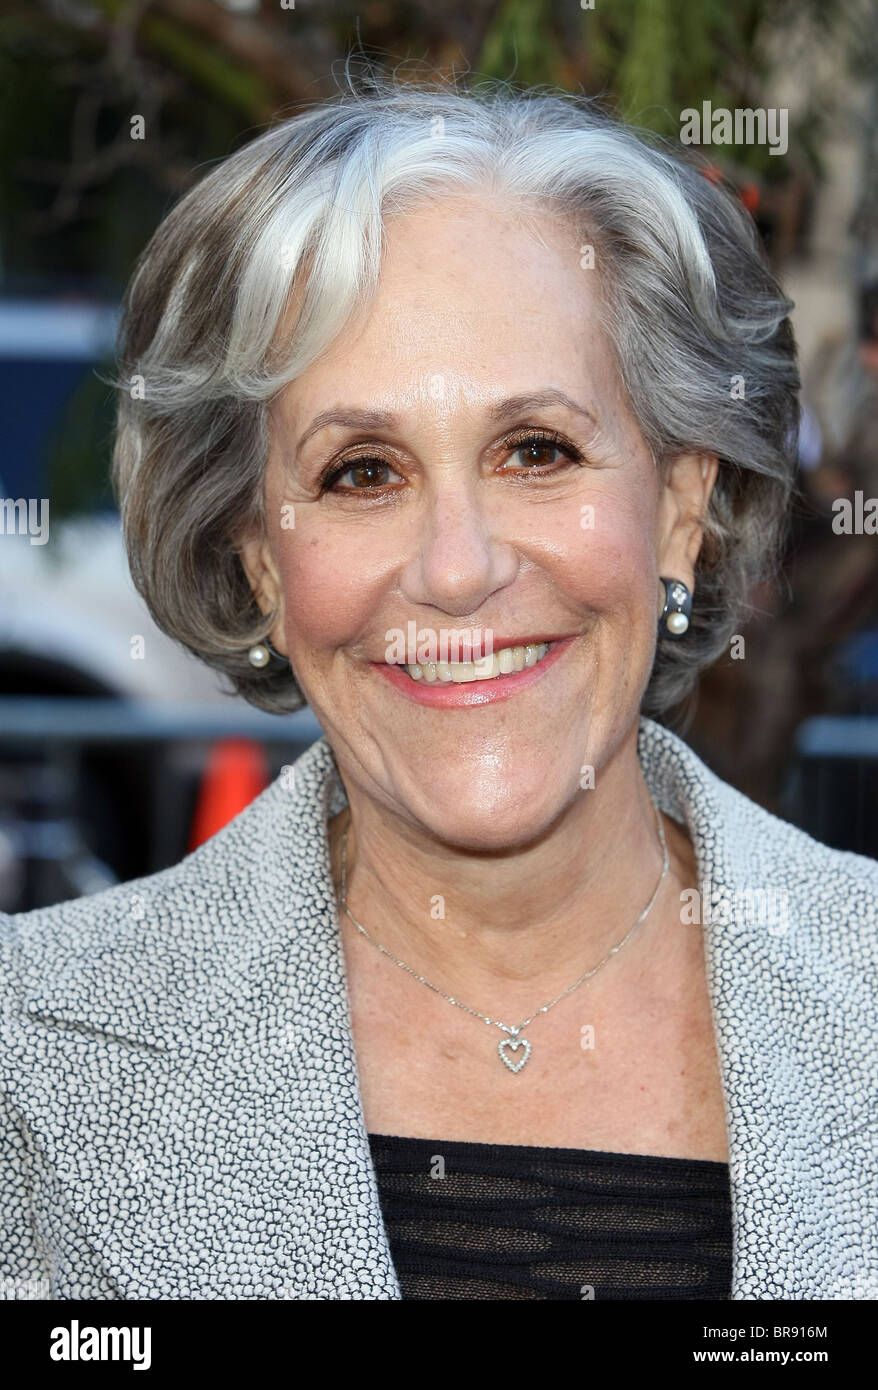 KATHRYN LASKY LEGEND OF THE GUARDIANS: THE OWLS OF GA'HOOLE WORLD PREMIERE HOLLYWOOD LOS ANGELES CALIFORNIA USA 19 September Stock Photo